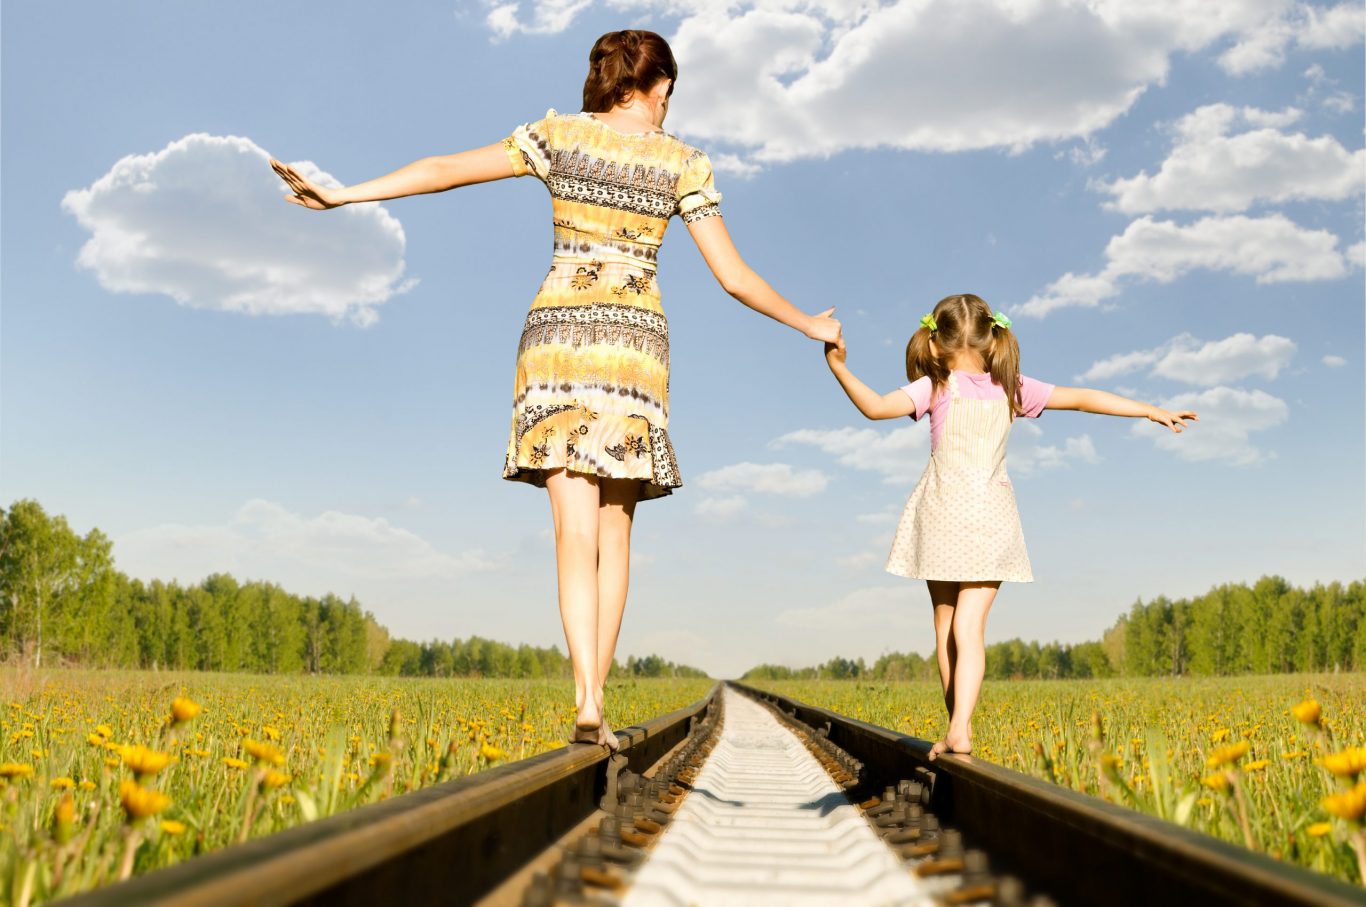 Balance with daughter on train tracks